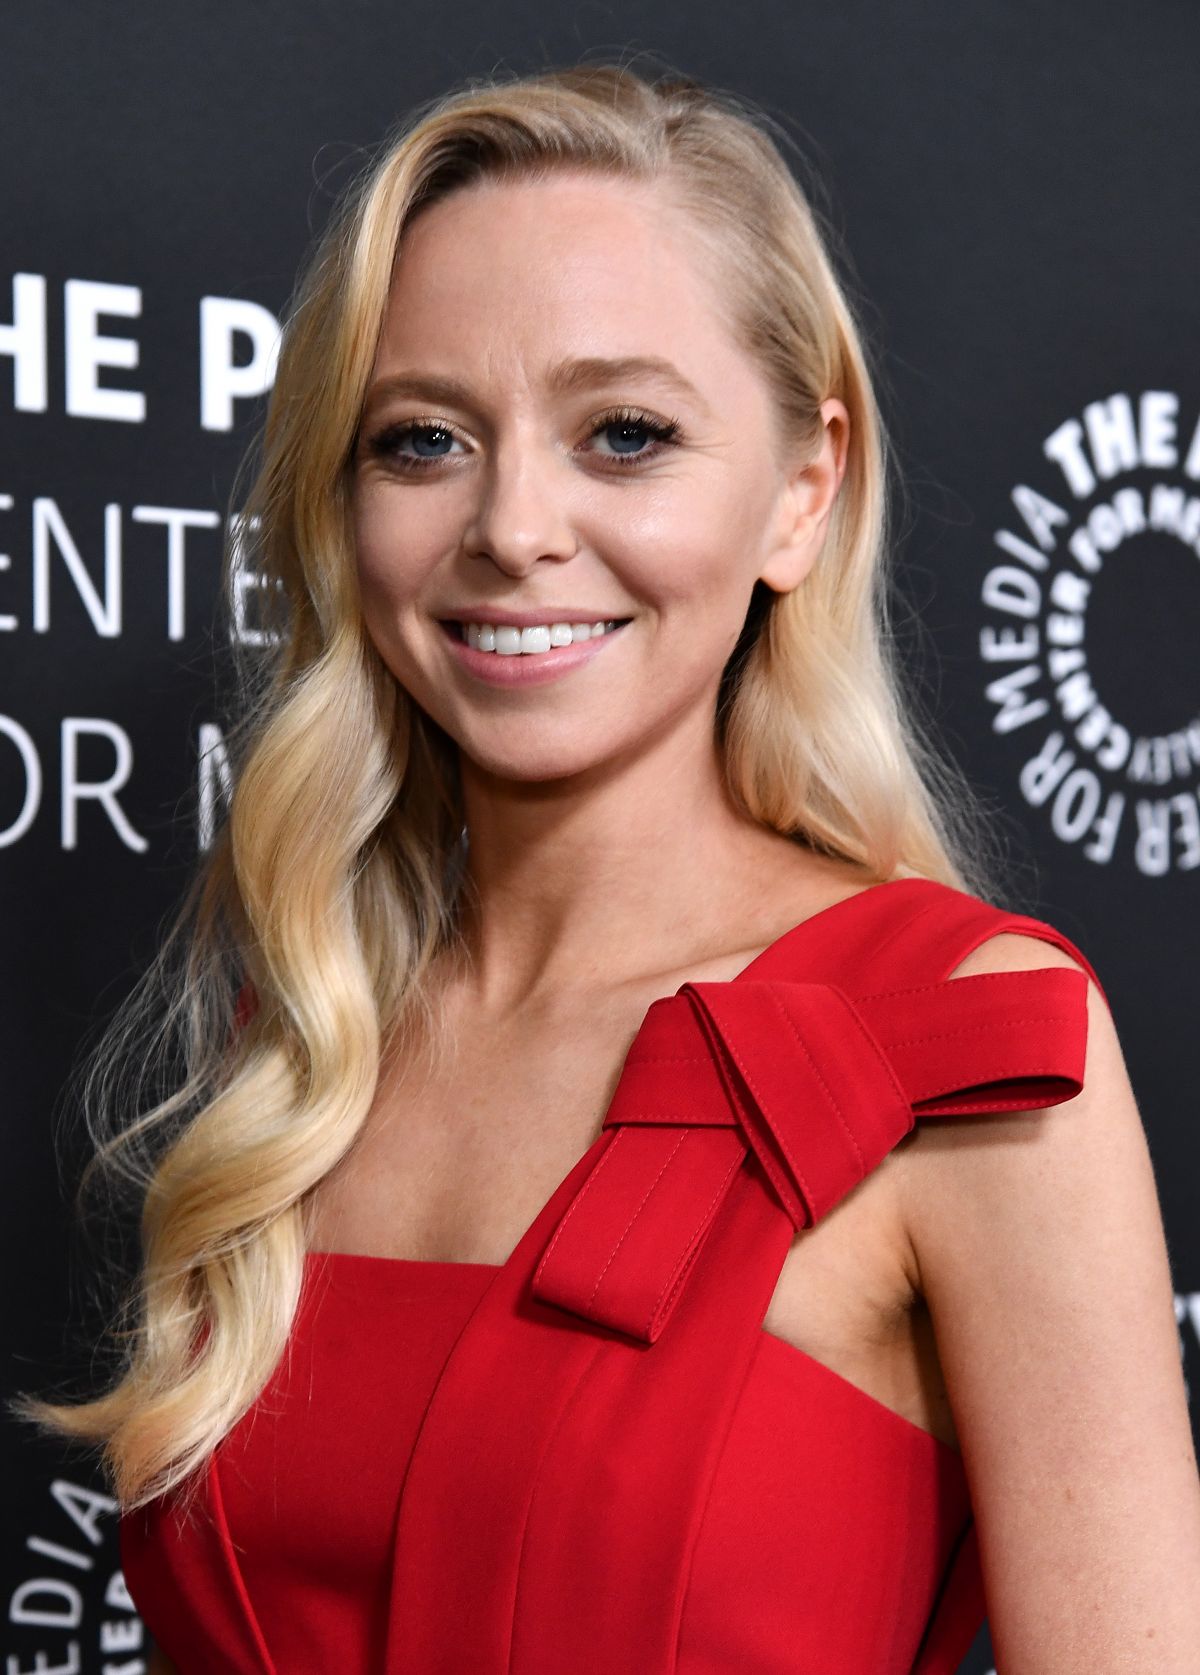 PORTIA DOUBLEDAY at Paley Women in TV Gala in Los Angeles 10/12/2017.